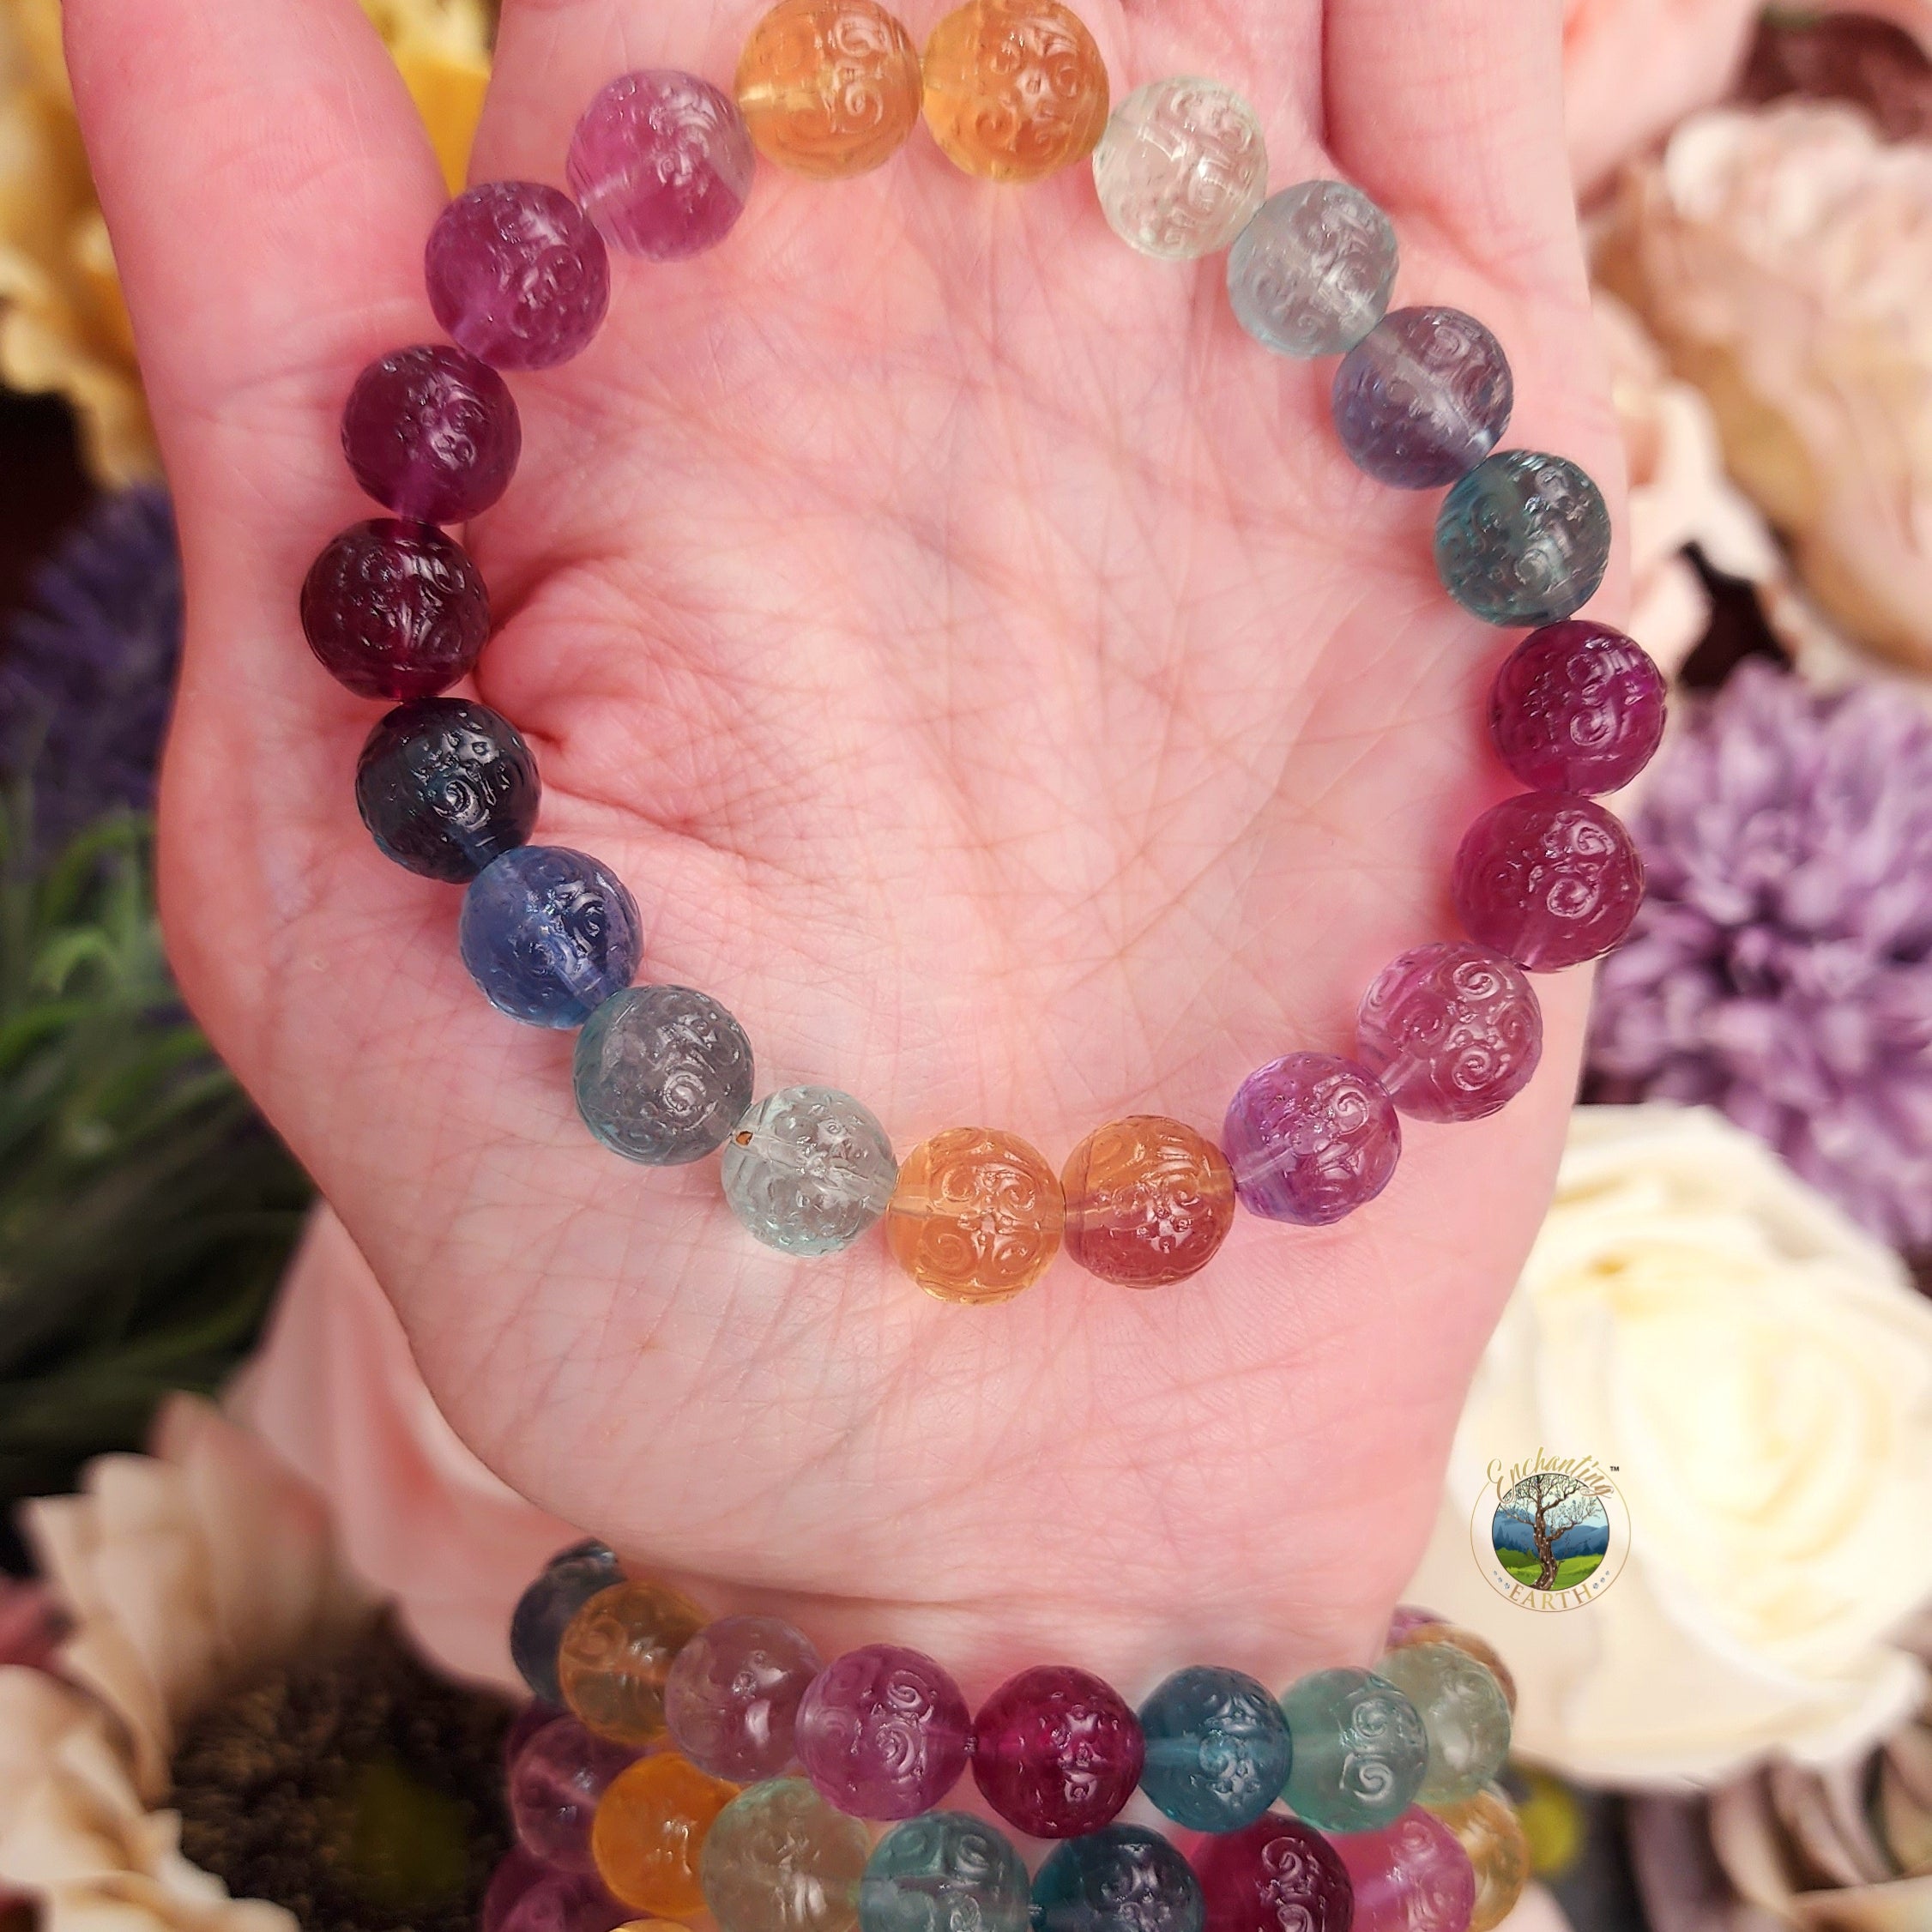 Fluorite Lotus Carved Bracelet (High Quality) for Focus and Mental Clarity